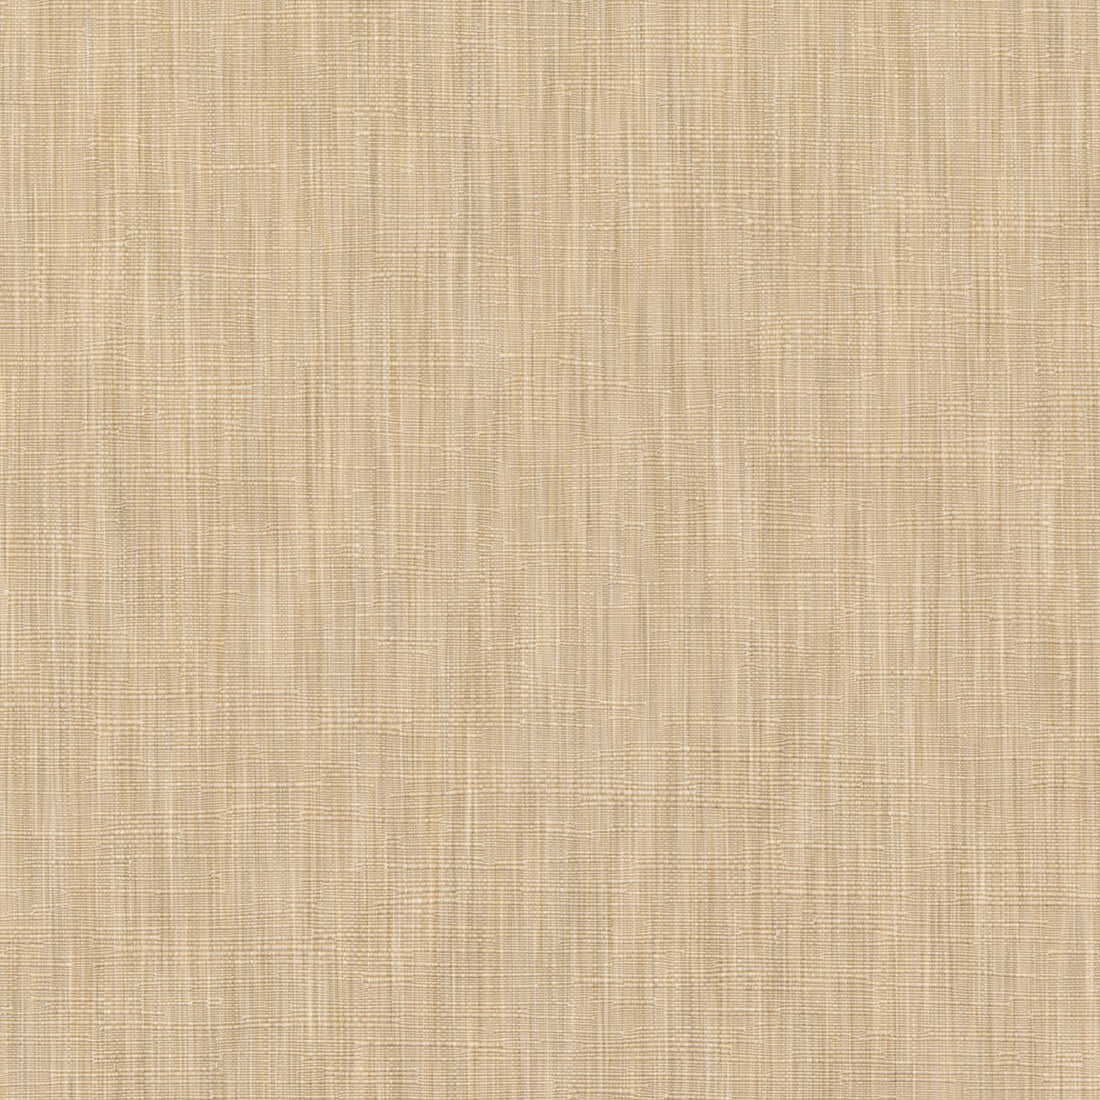 Saverne Texture fabric in wheat color - pattern 8019122.16.0 - by Brunschwig &amp; Fils in the Alsace Weaves collection